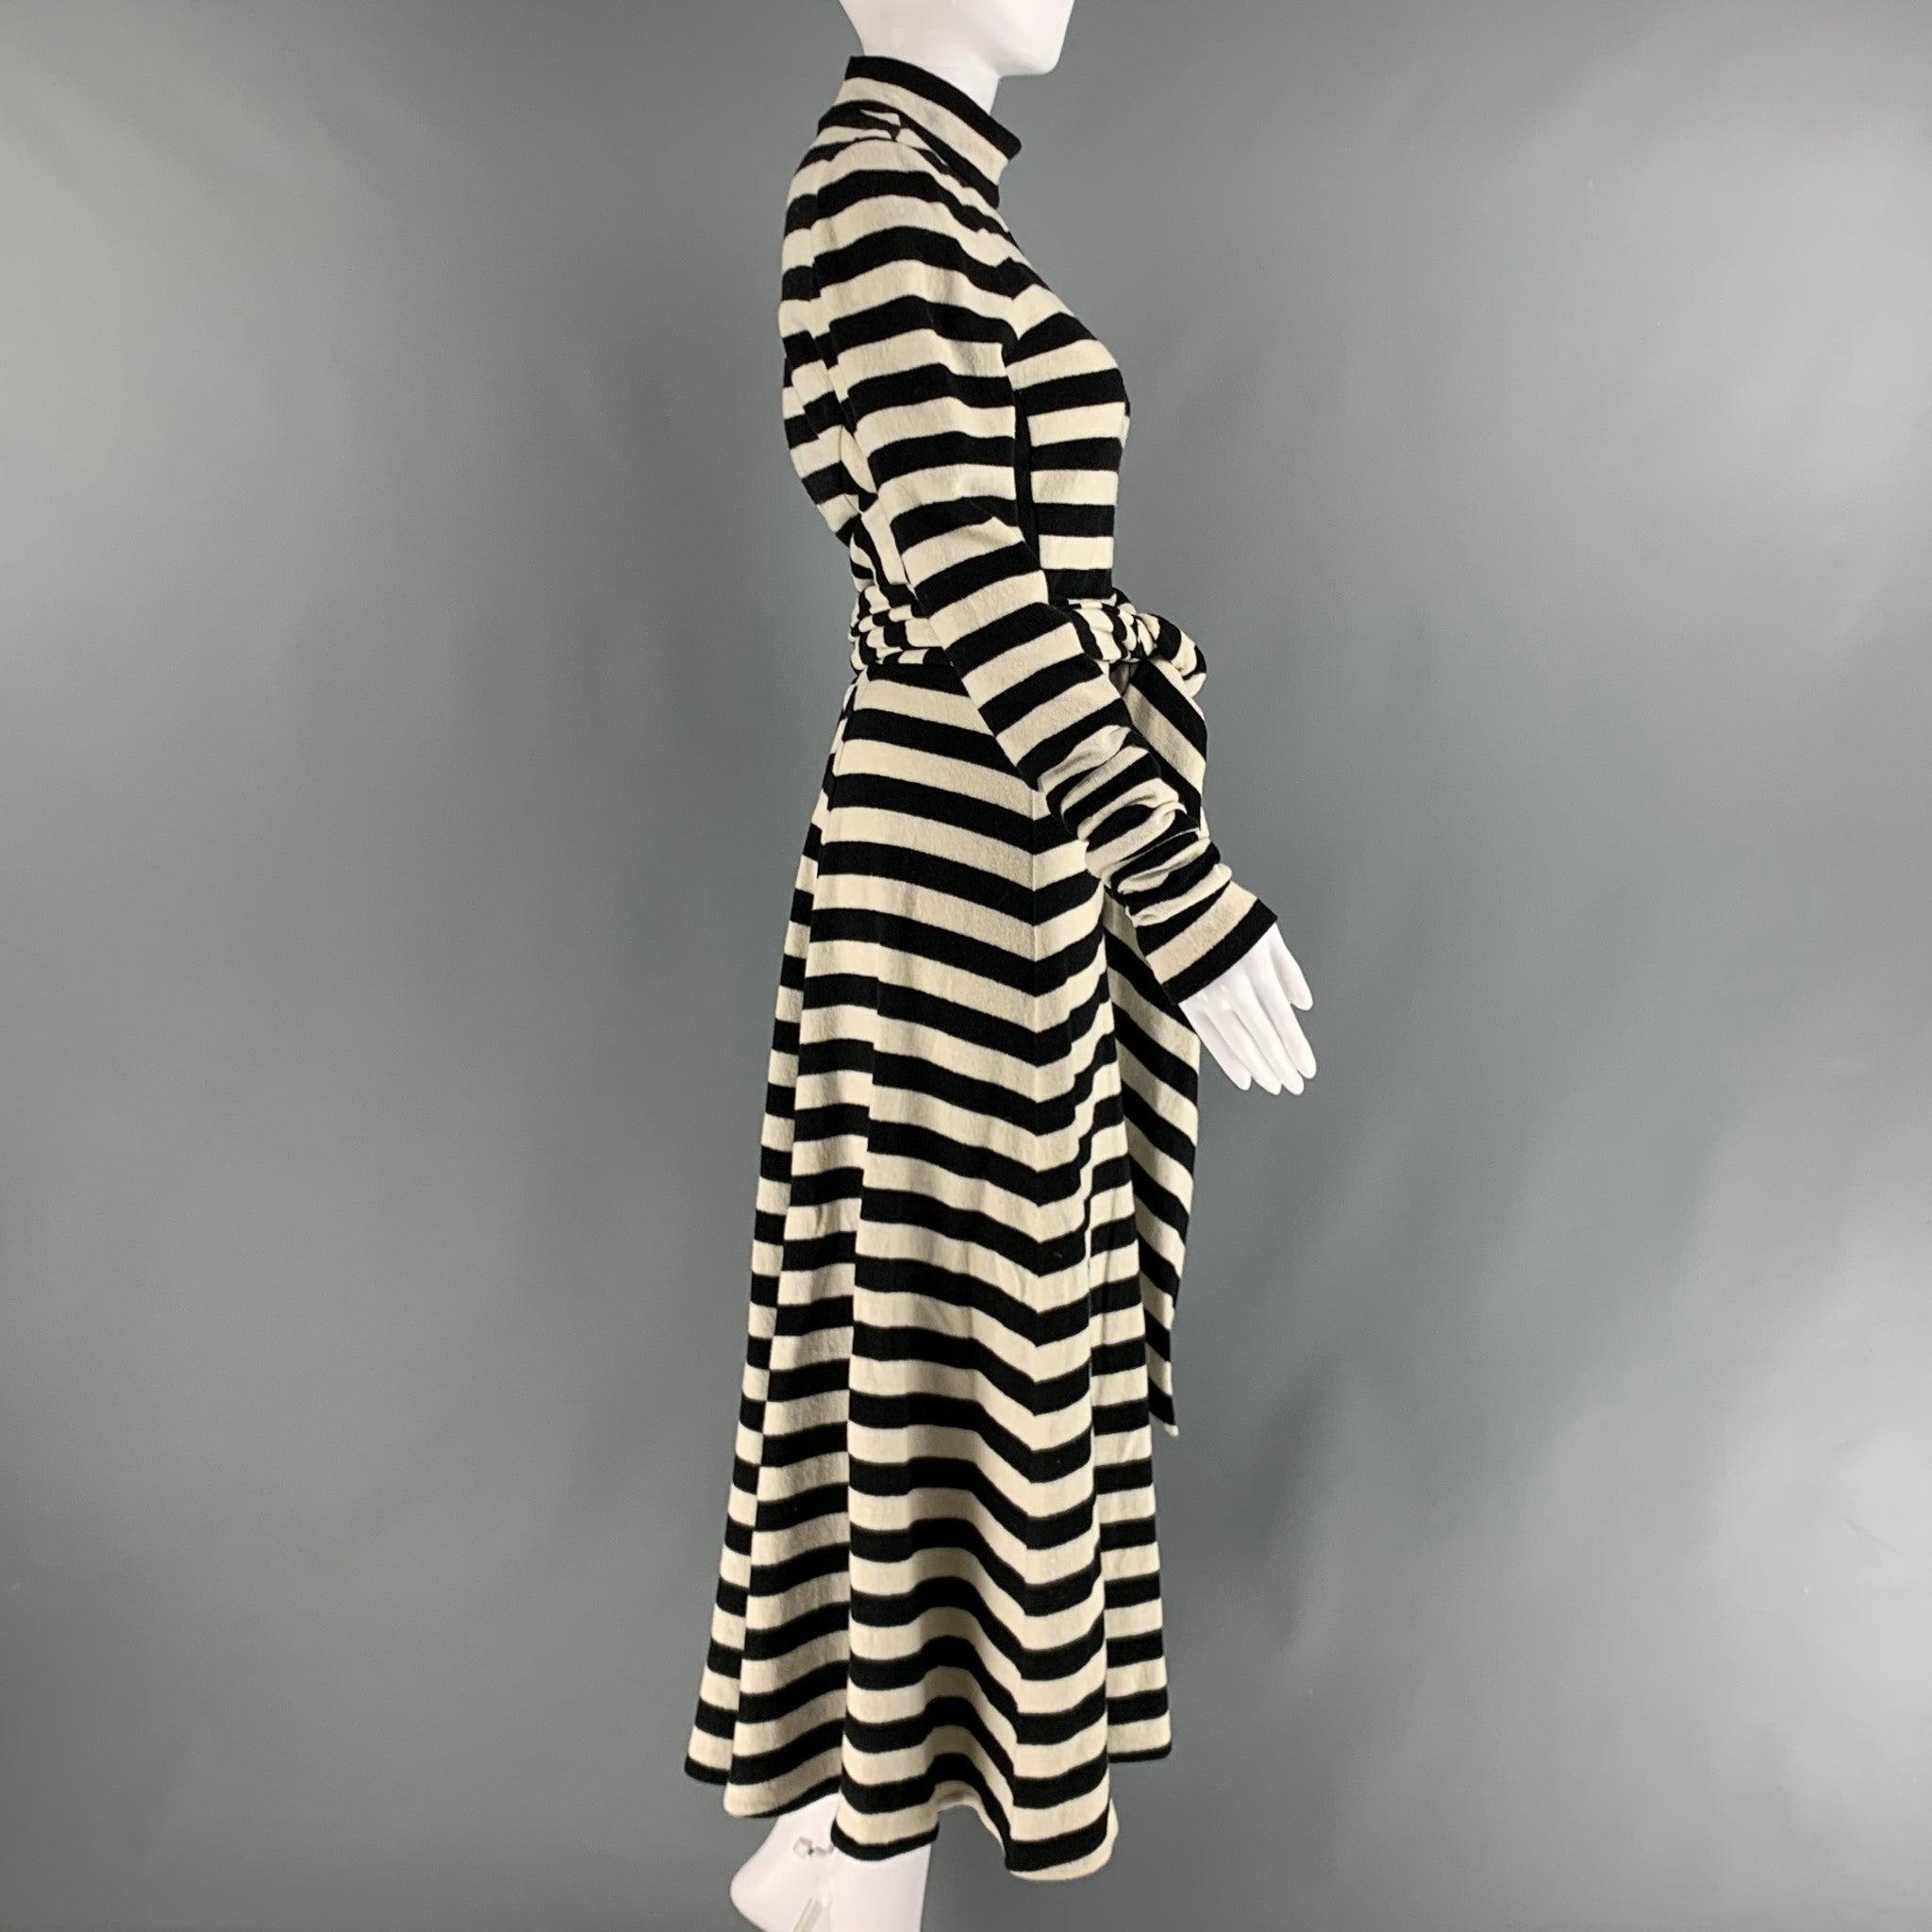 MARC JACOBS RUNWAY long sleeve maxi dress comes in black and white wool and nylon stripped jersey knit material featuring A-line silhouette, high neck, waist tie and half zip up closure at center back. Made in USA.Very Good Pre- Owned Condition.